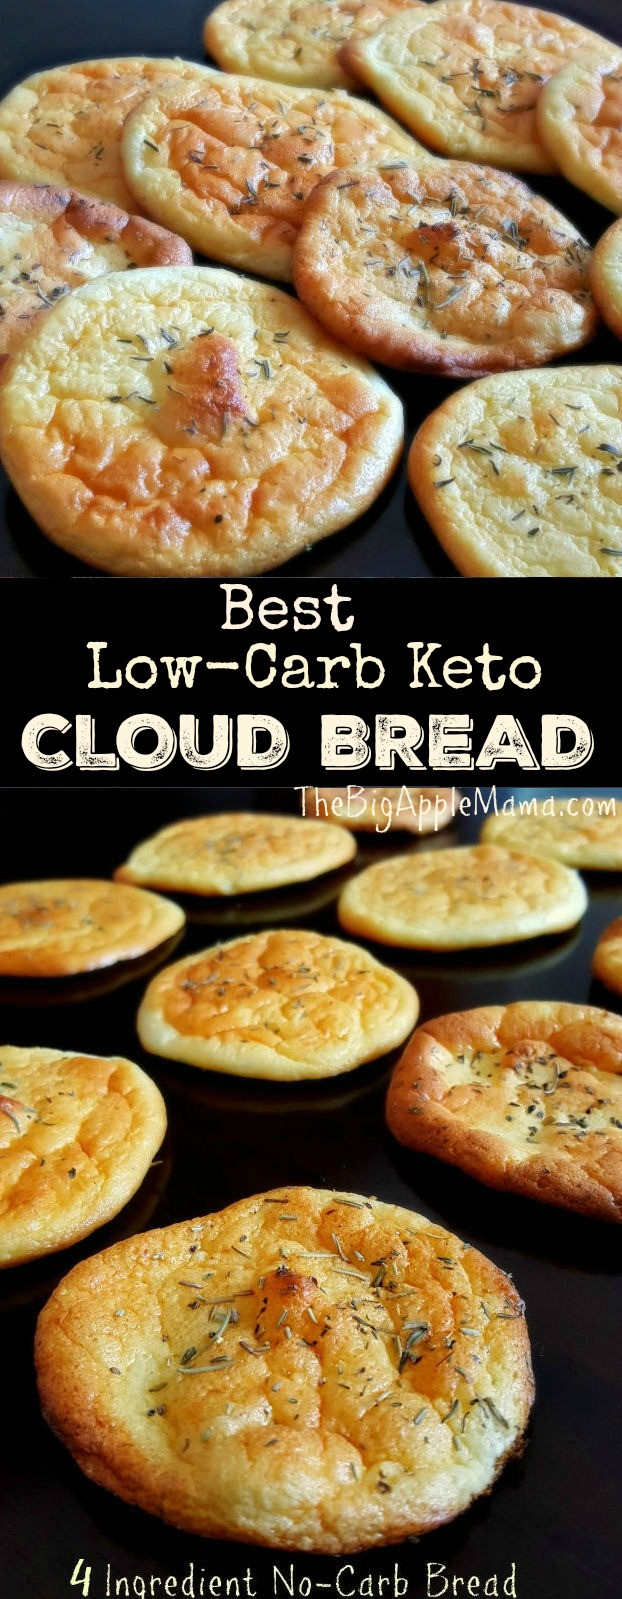 Non Carbohydrate Bread
 The Best No Carb Cloud Bread with only 4 Ingre nts